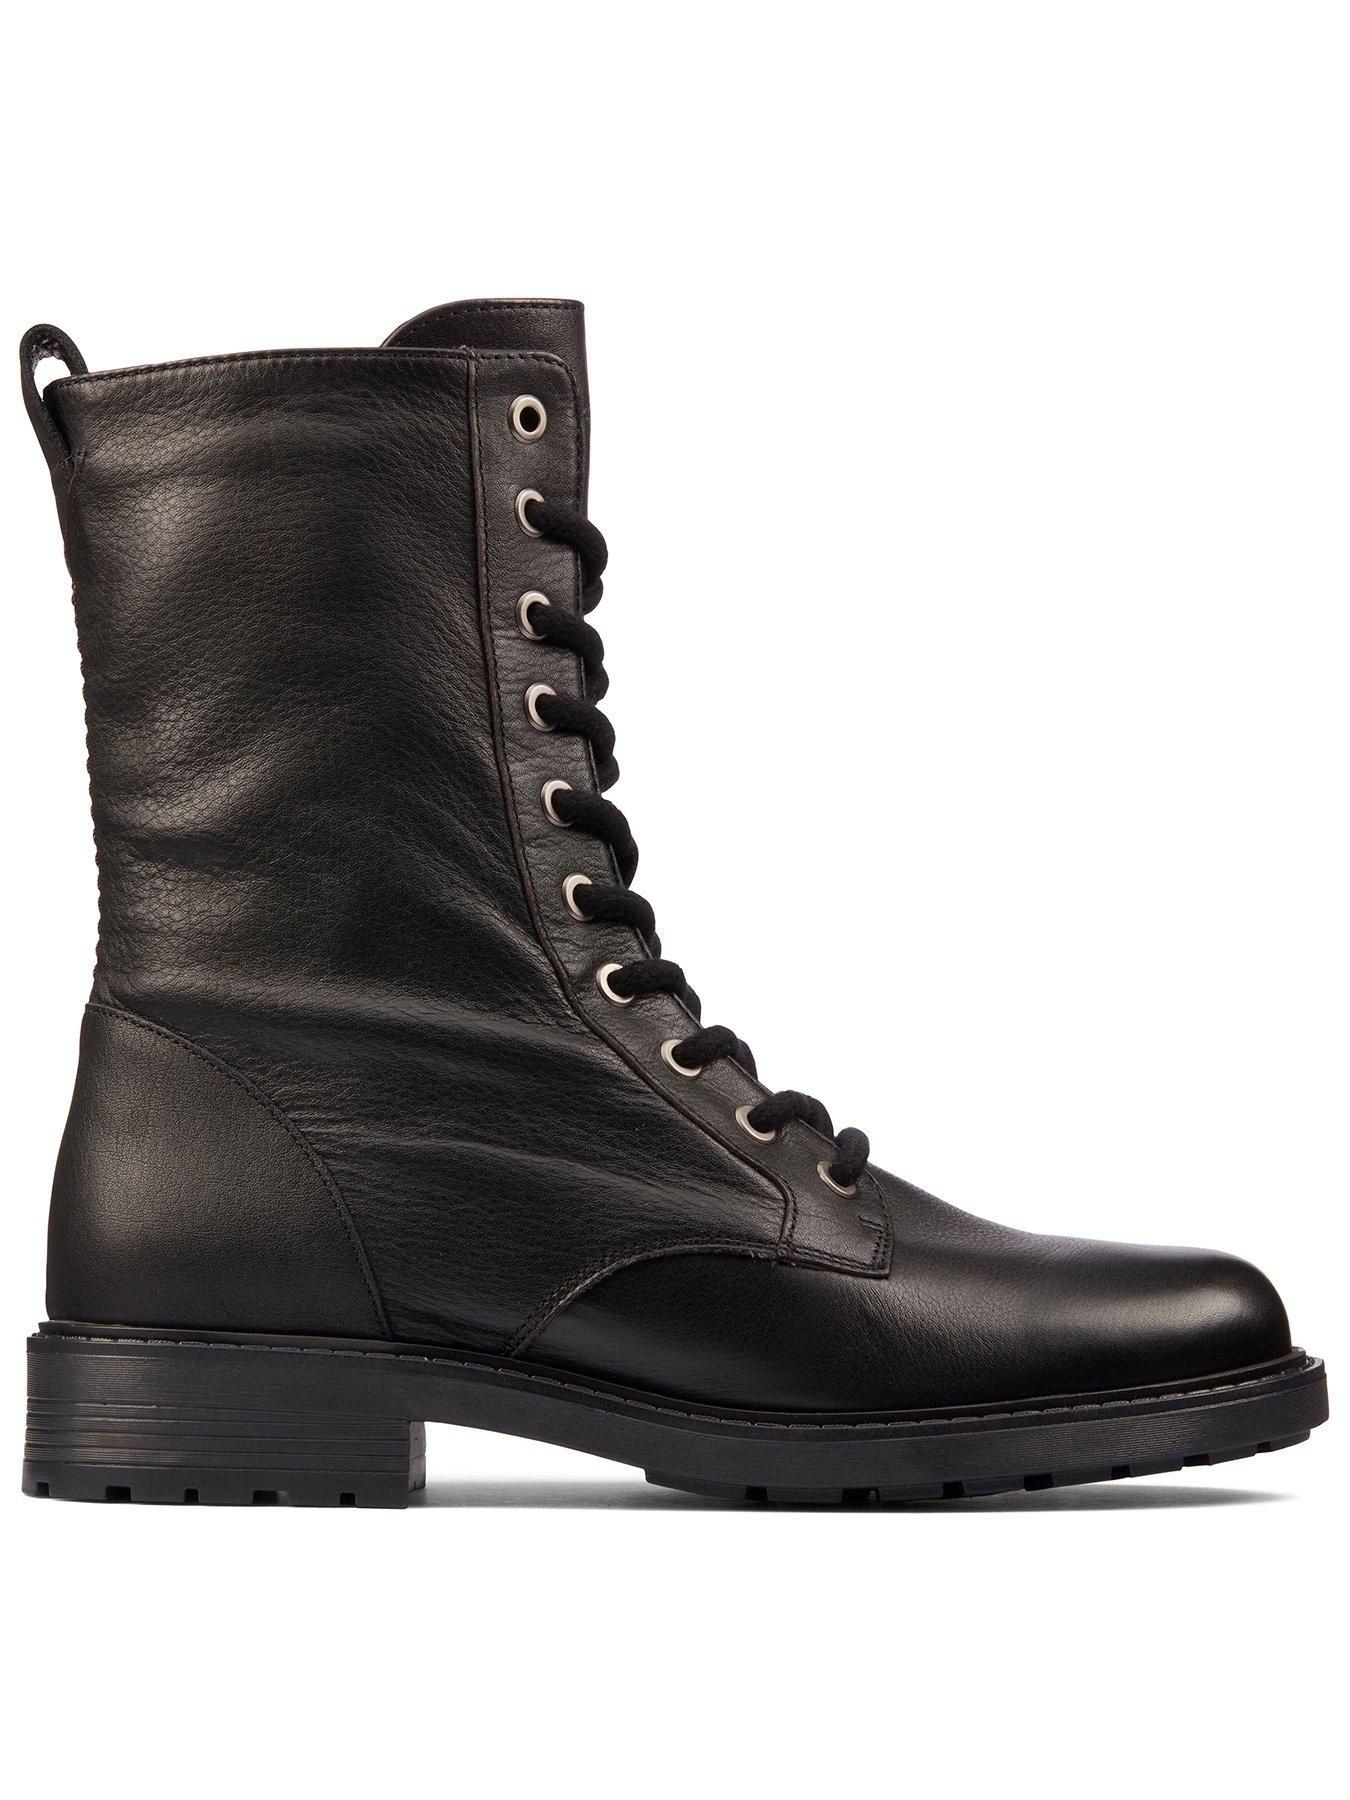 Clarks Orinoco2 Style Wide Fit Boots - Black Leather | very.co.uk